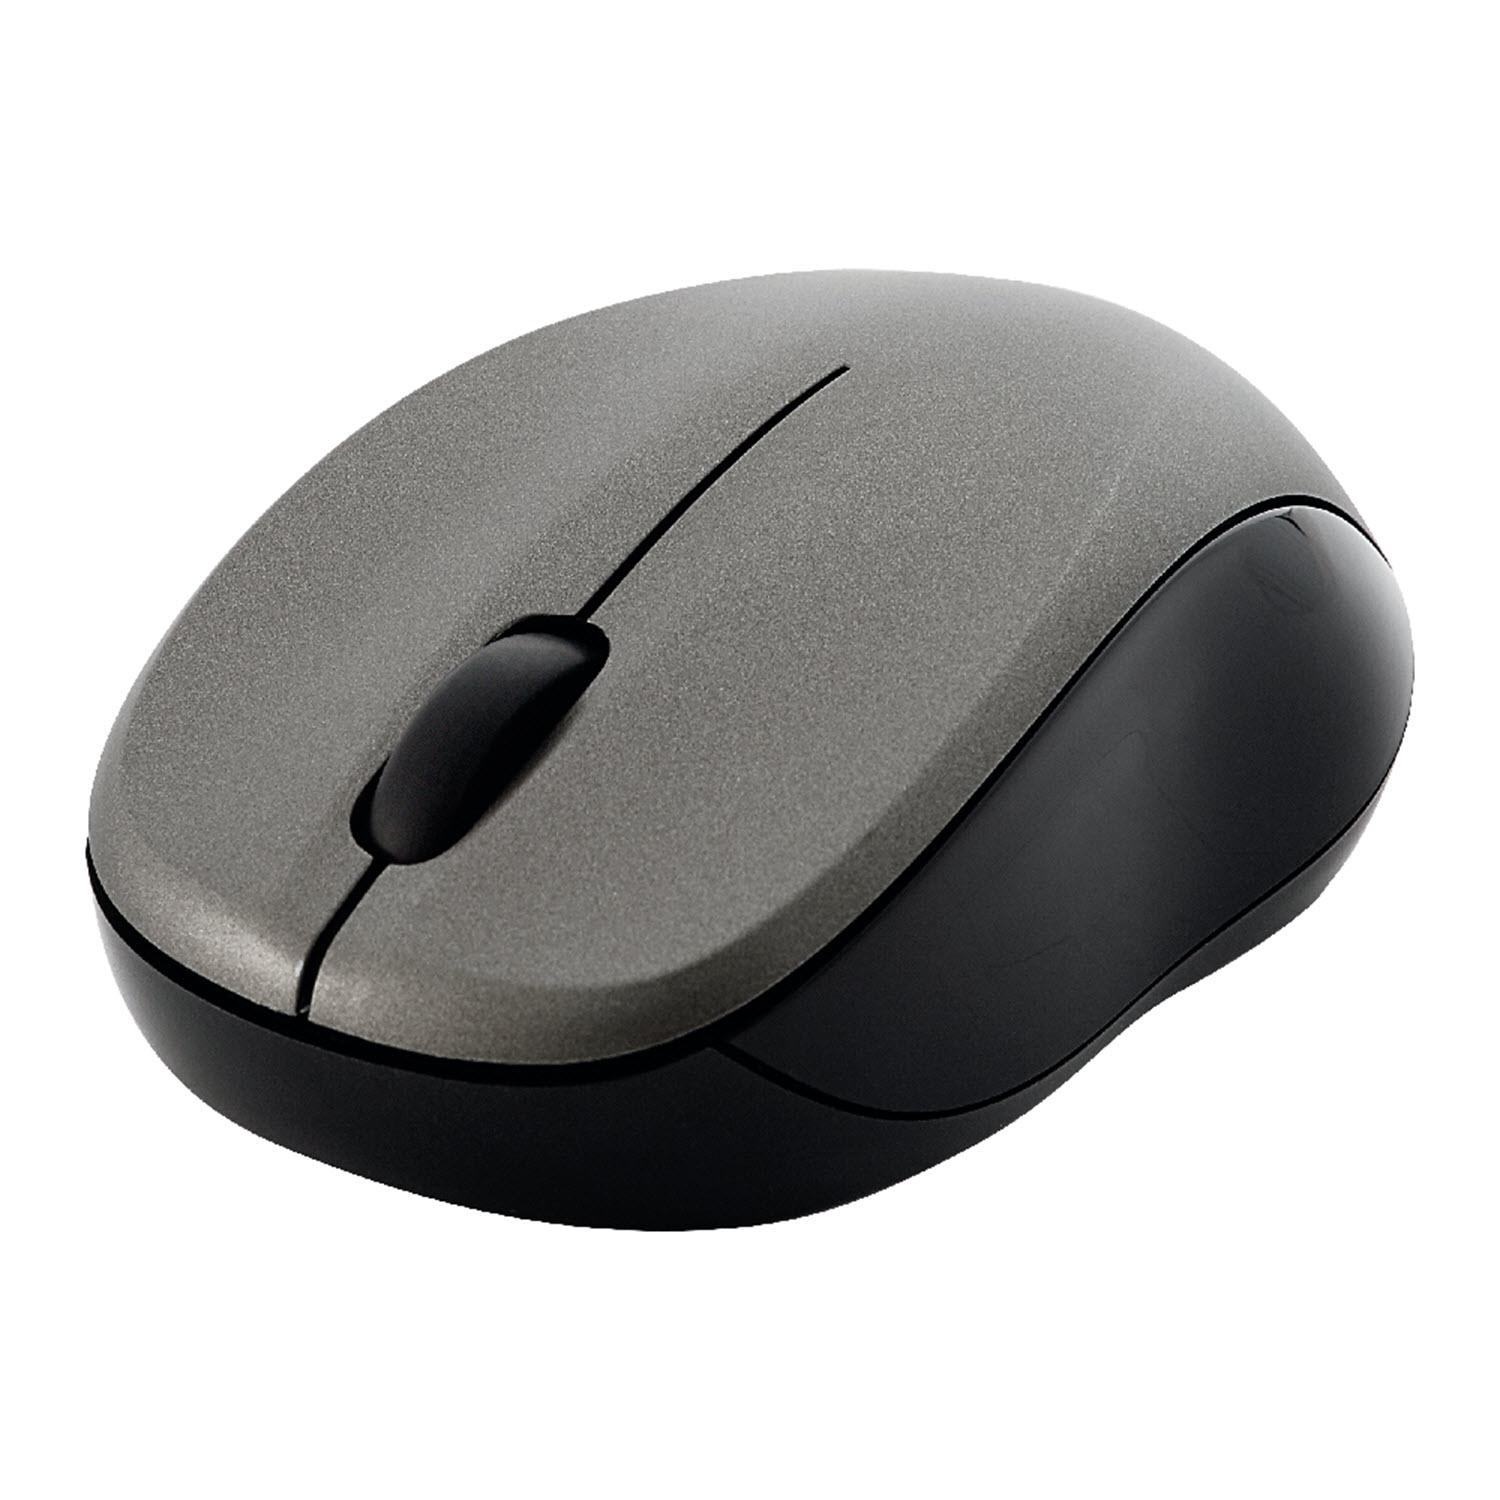 Verbatim Silent Wireless LED Mouse – Keyboards and Mice